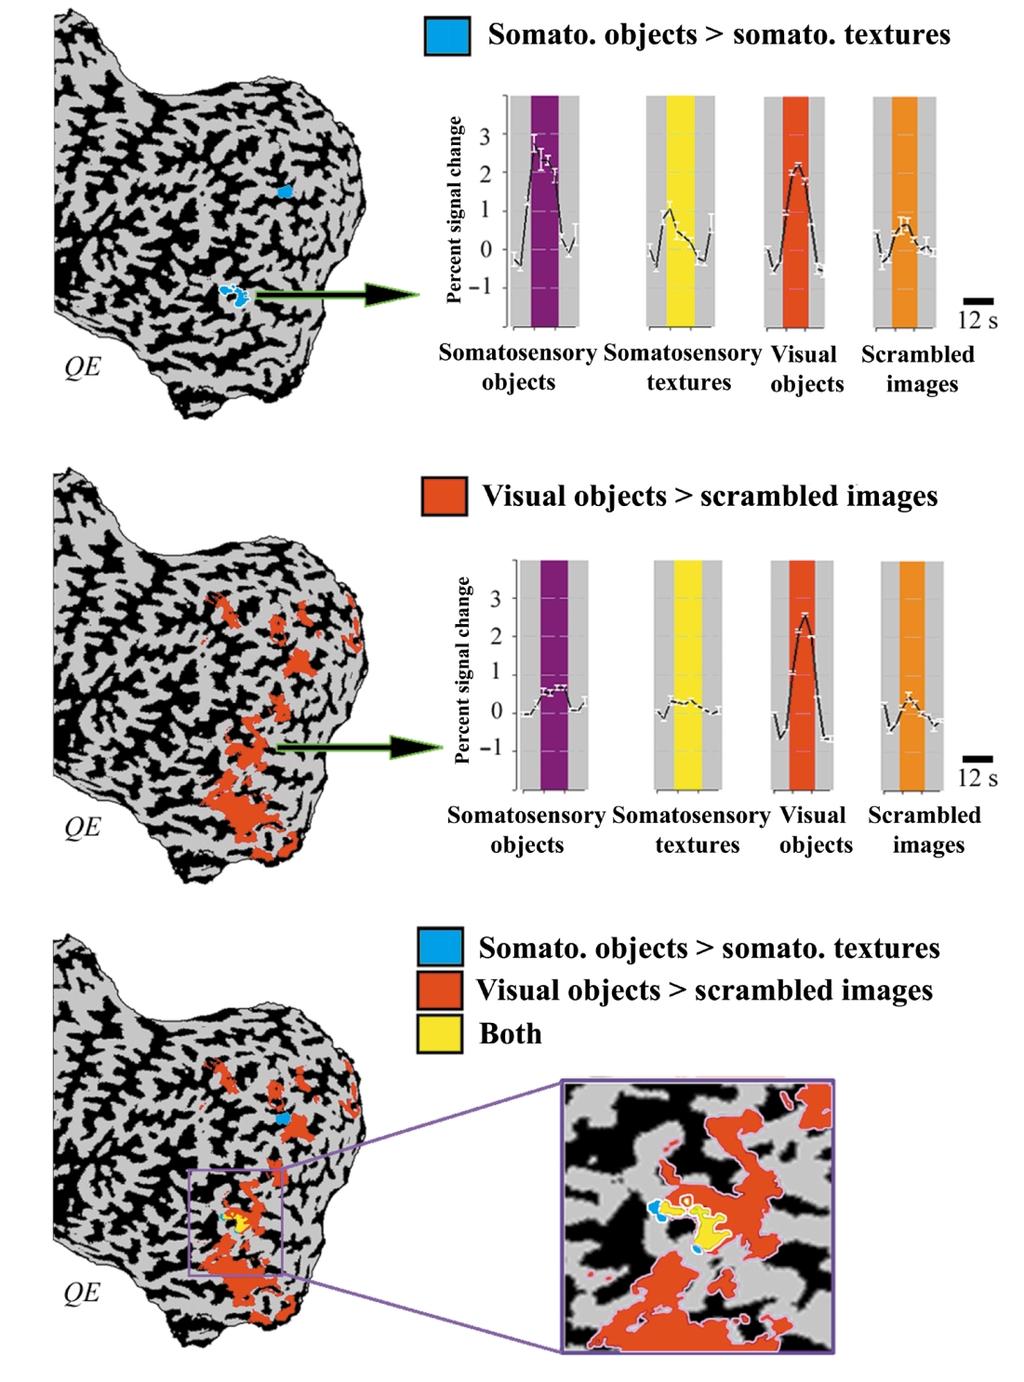 Fig. 3. Cortical maps and time course of regions showing preferential somatosensory, visual and multimodal (visuohaptic) object activation in one subject (QE).